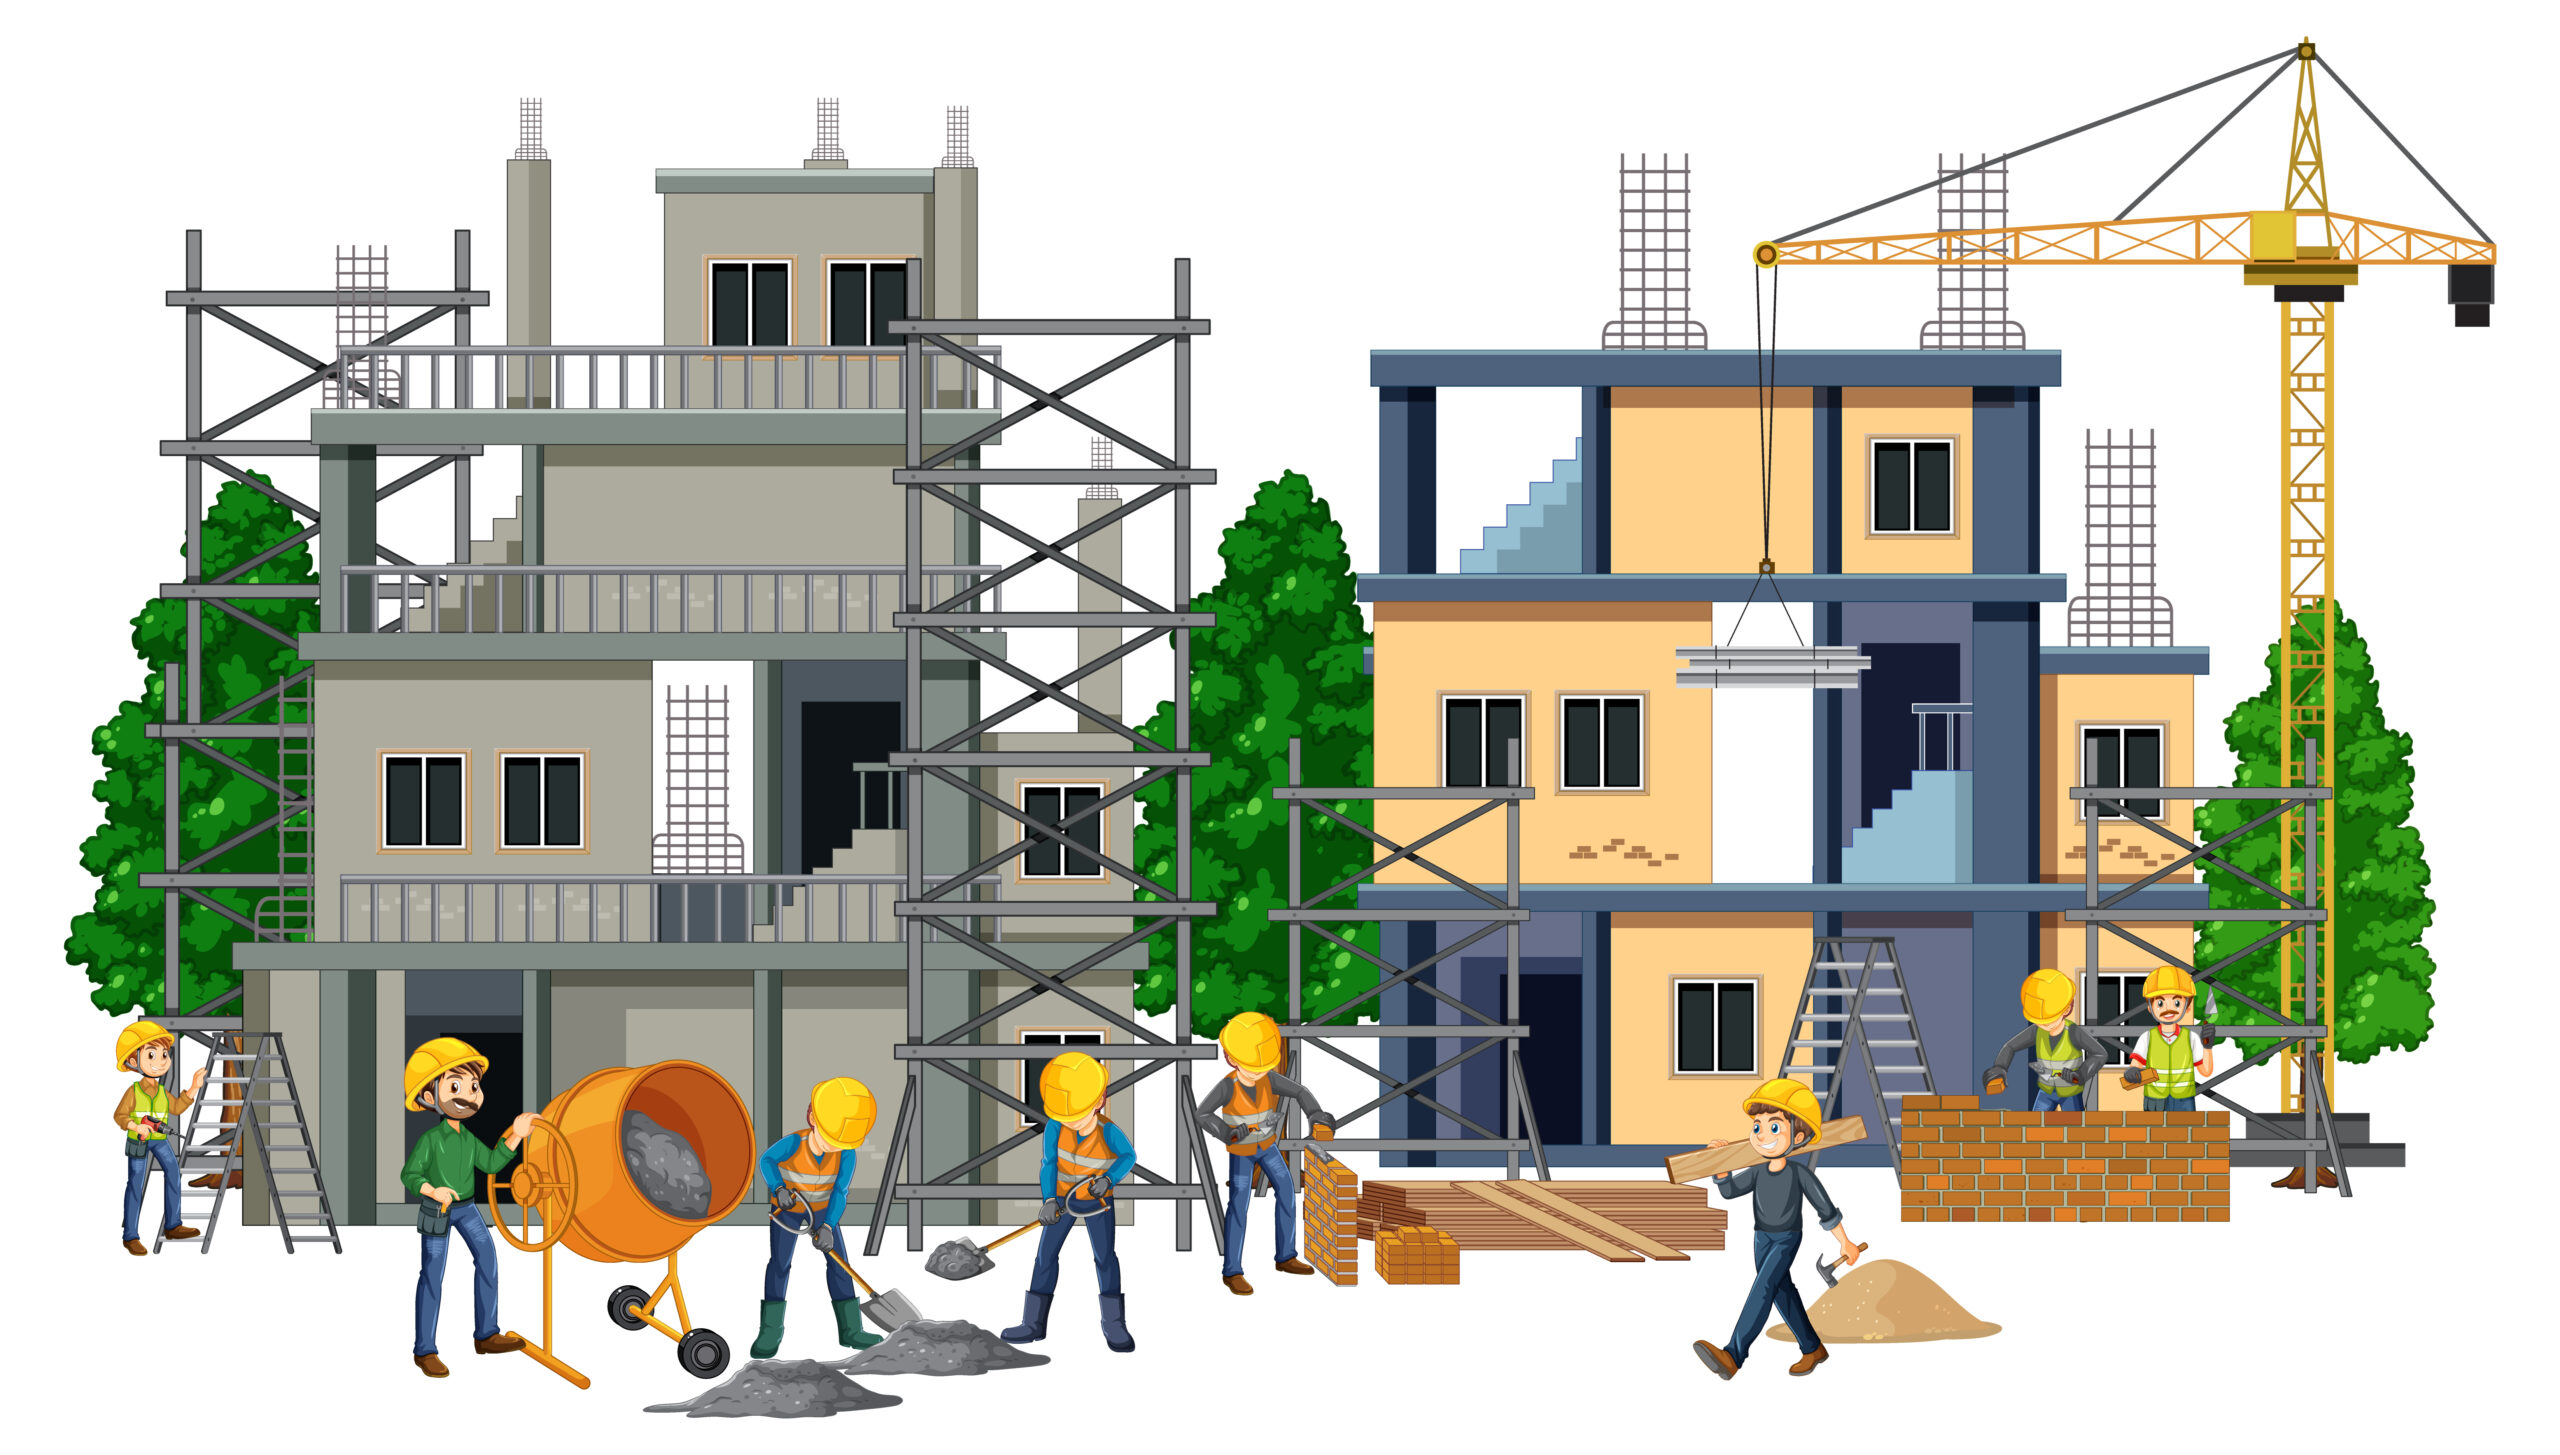 Managing Construction Projects